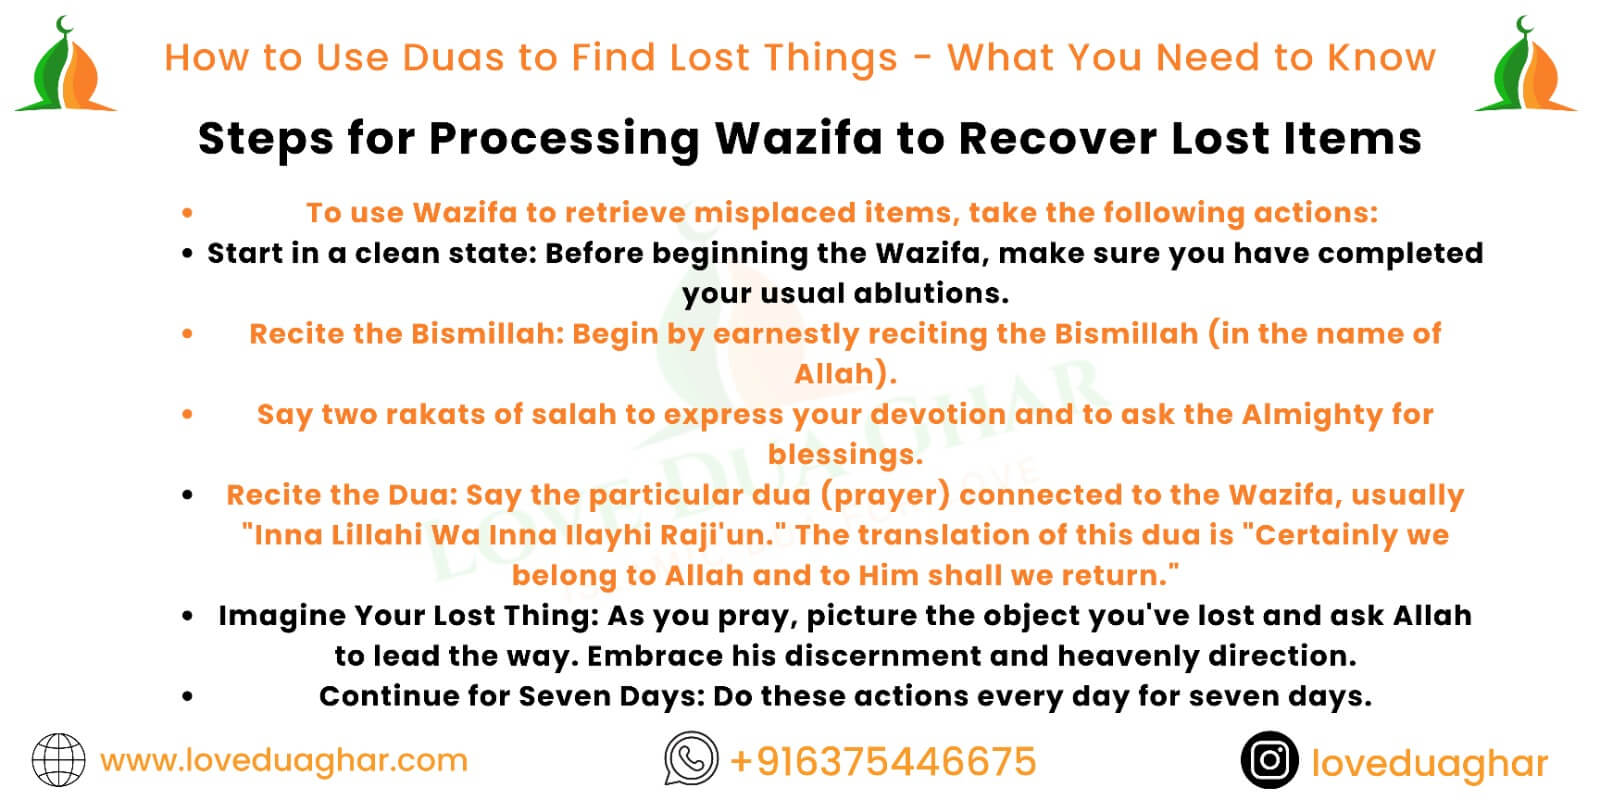 Dua to Find Lost Things